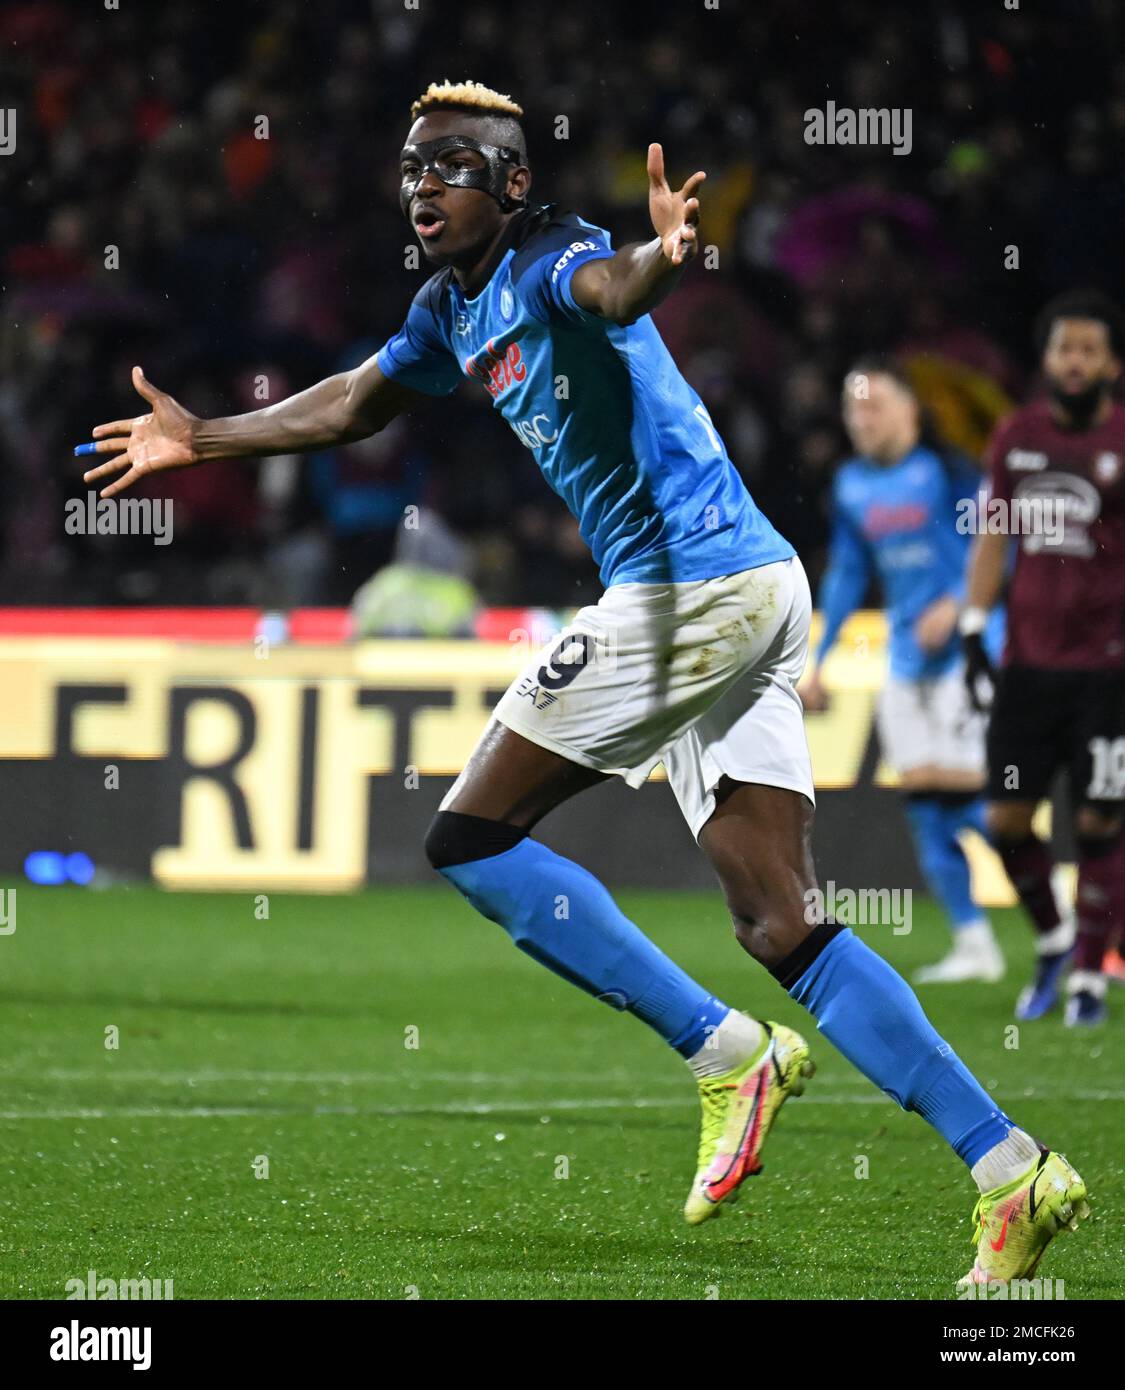 Salerno, Italy. 21st Jan, 2023. Napoli's Victor Osimhen celebrates his goal during a Serie A football match between Napoli and Salernitana in Salerno, Italy, Jan. 21, 2023. Credit: Alberto Lingria/Xinhua/Alamy Live News Stock Photo